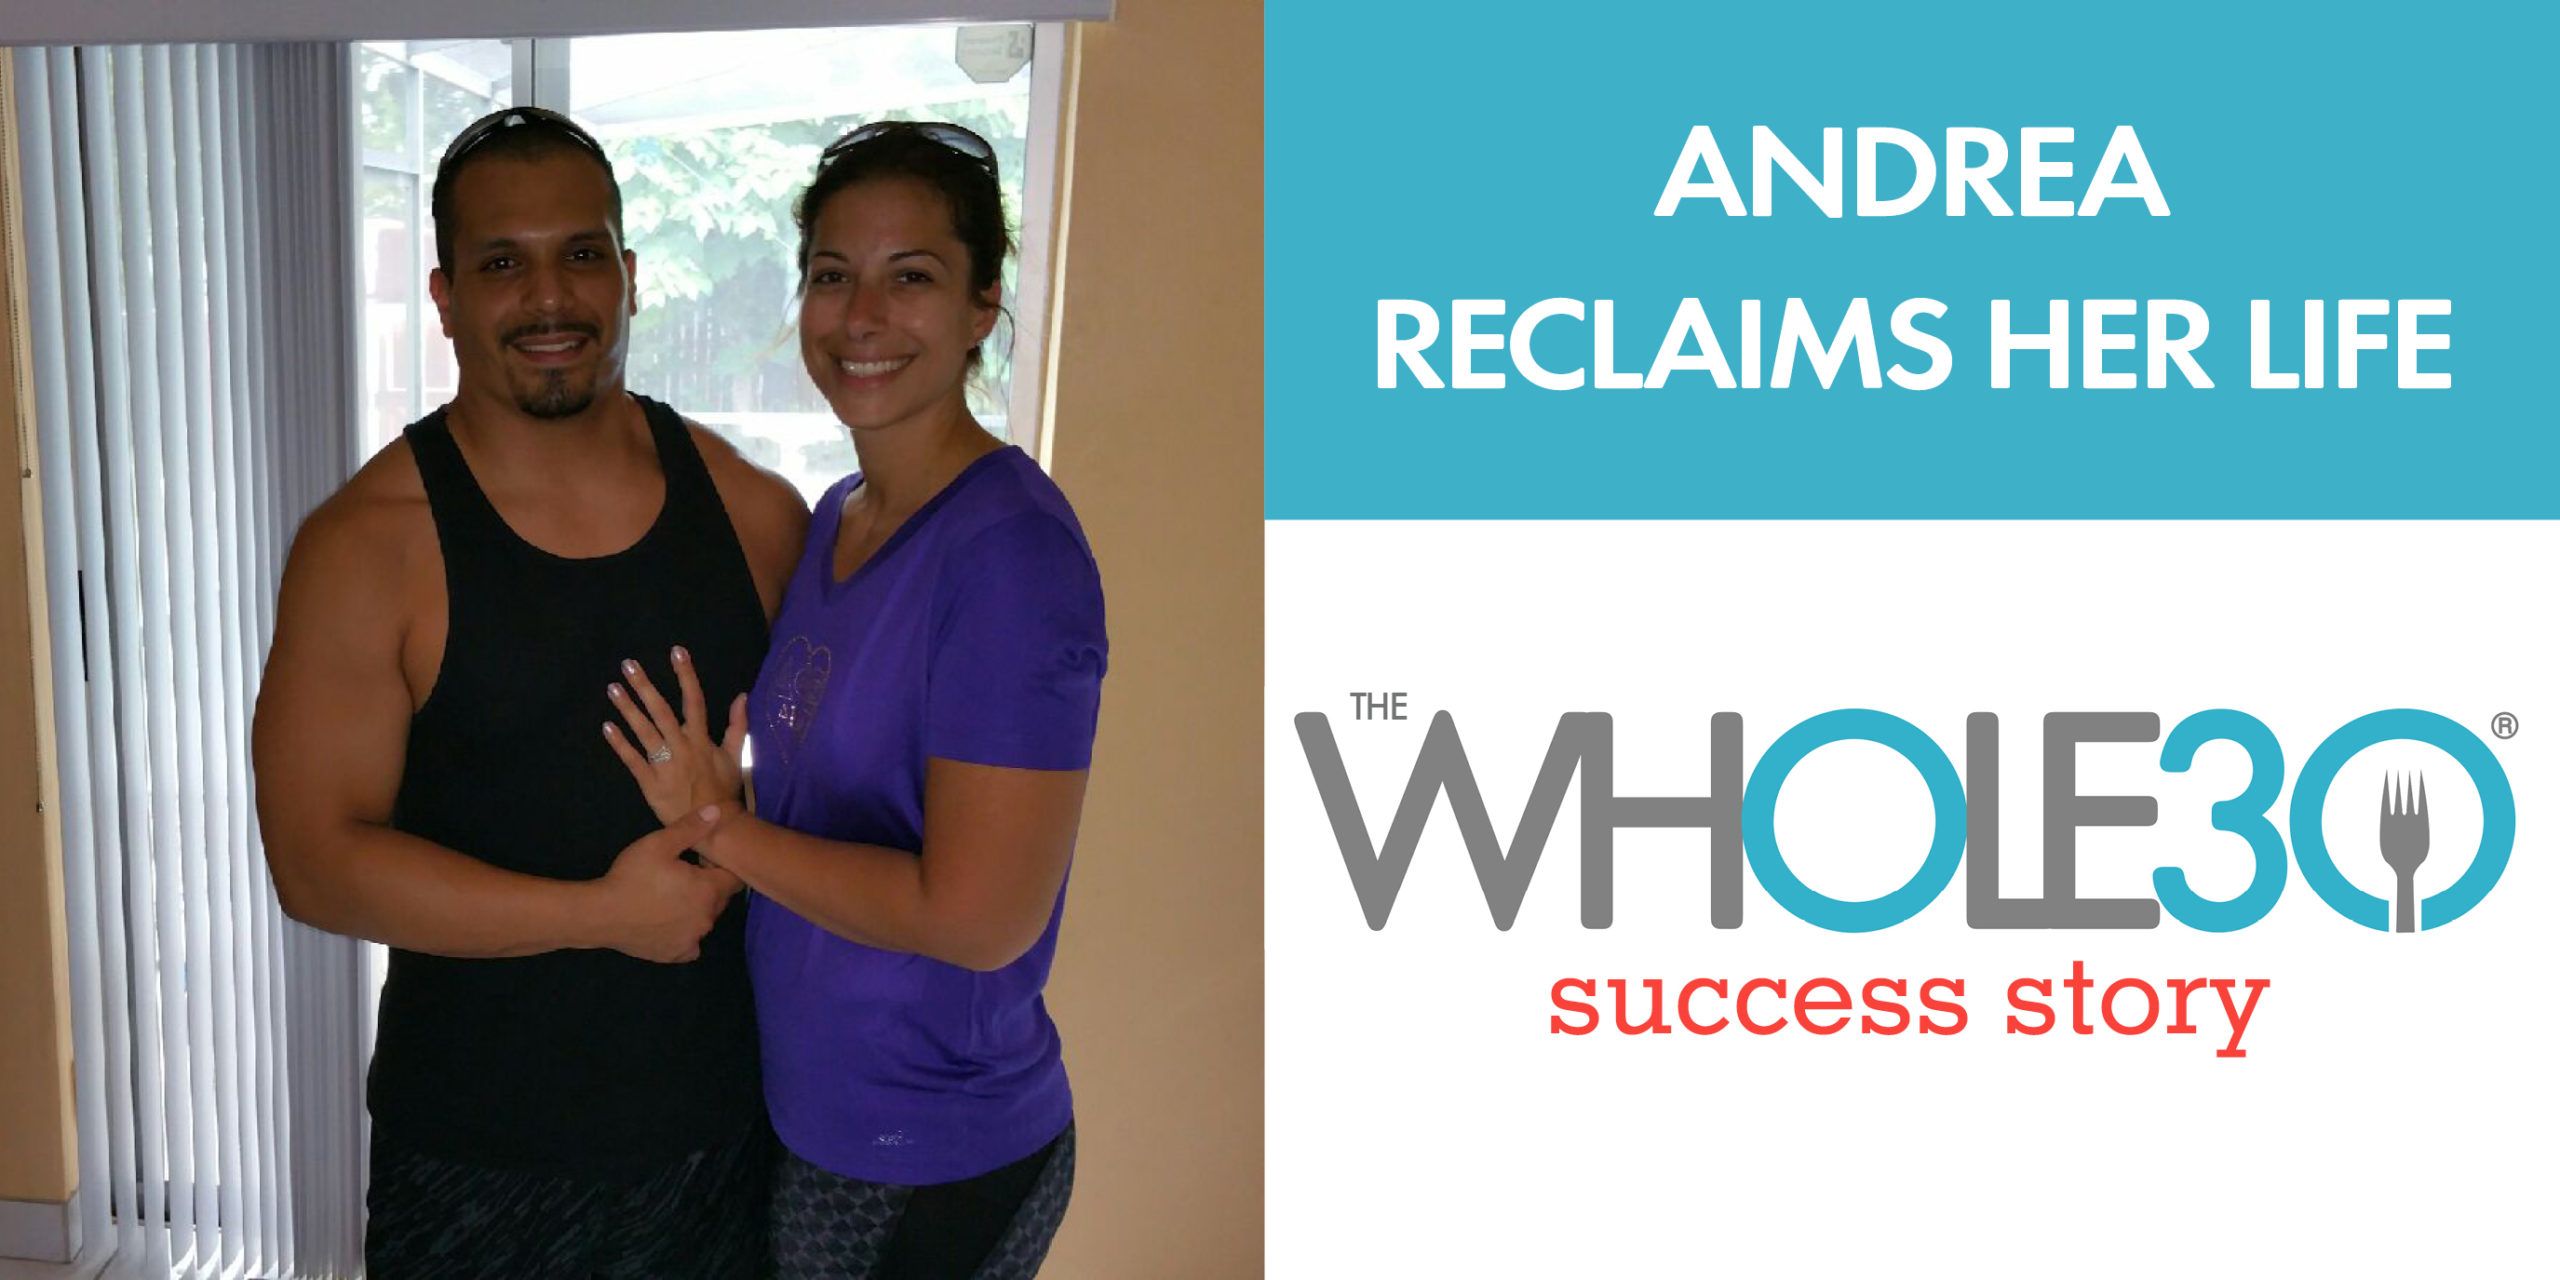 Ending Emotional Eating and Recovering from Surgery with The Whole30: Andrea’s Story